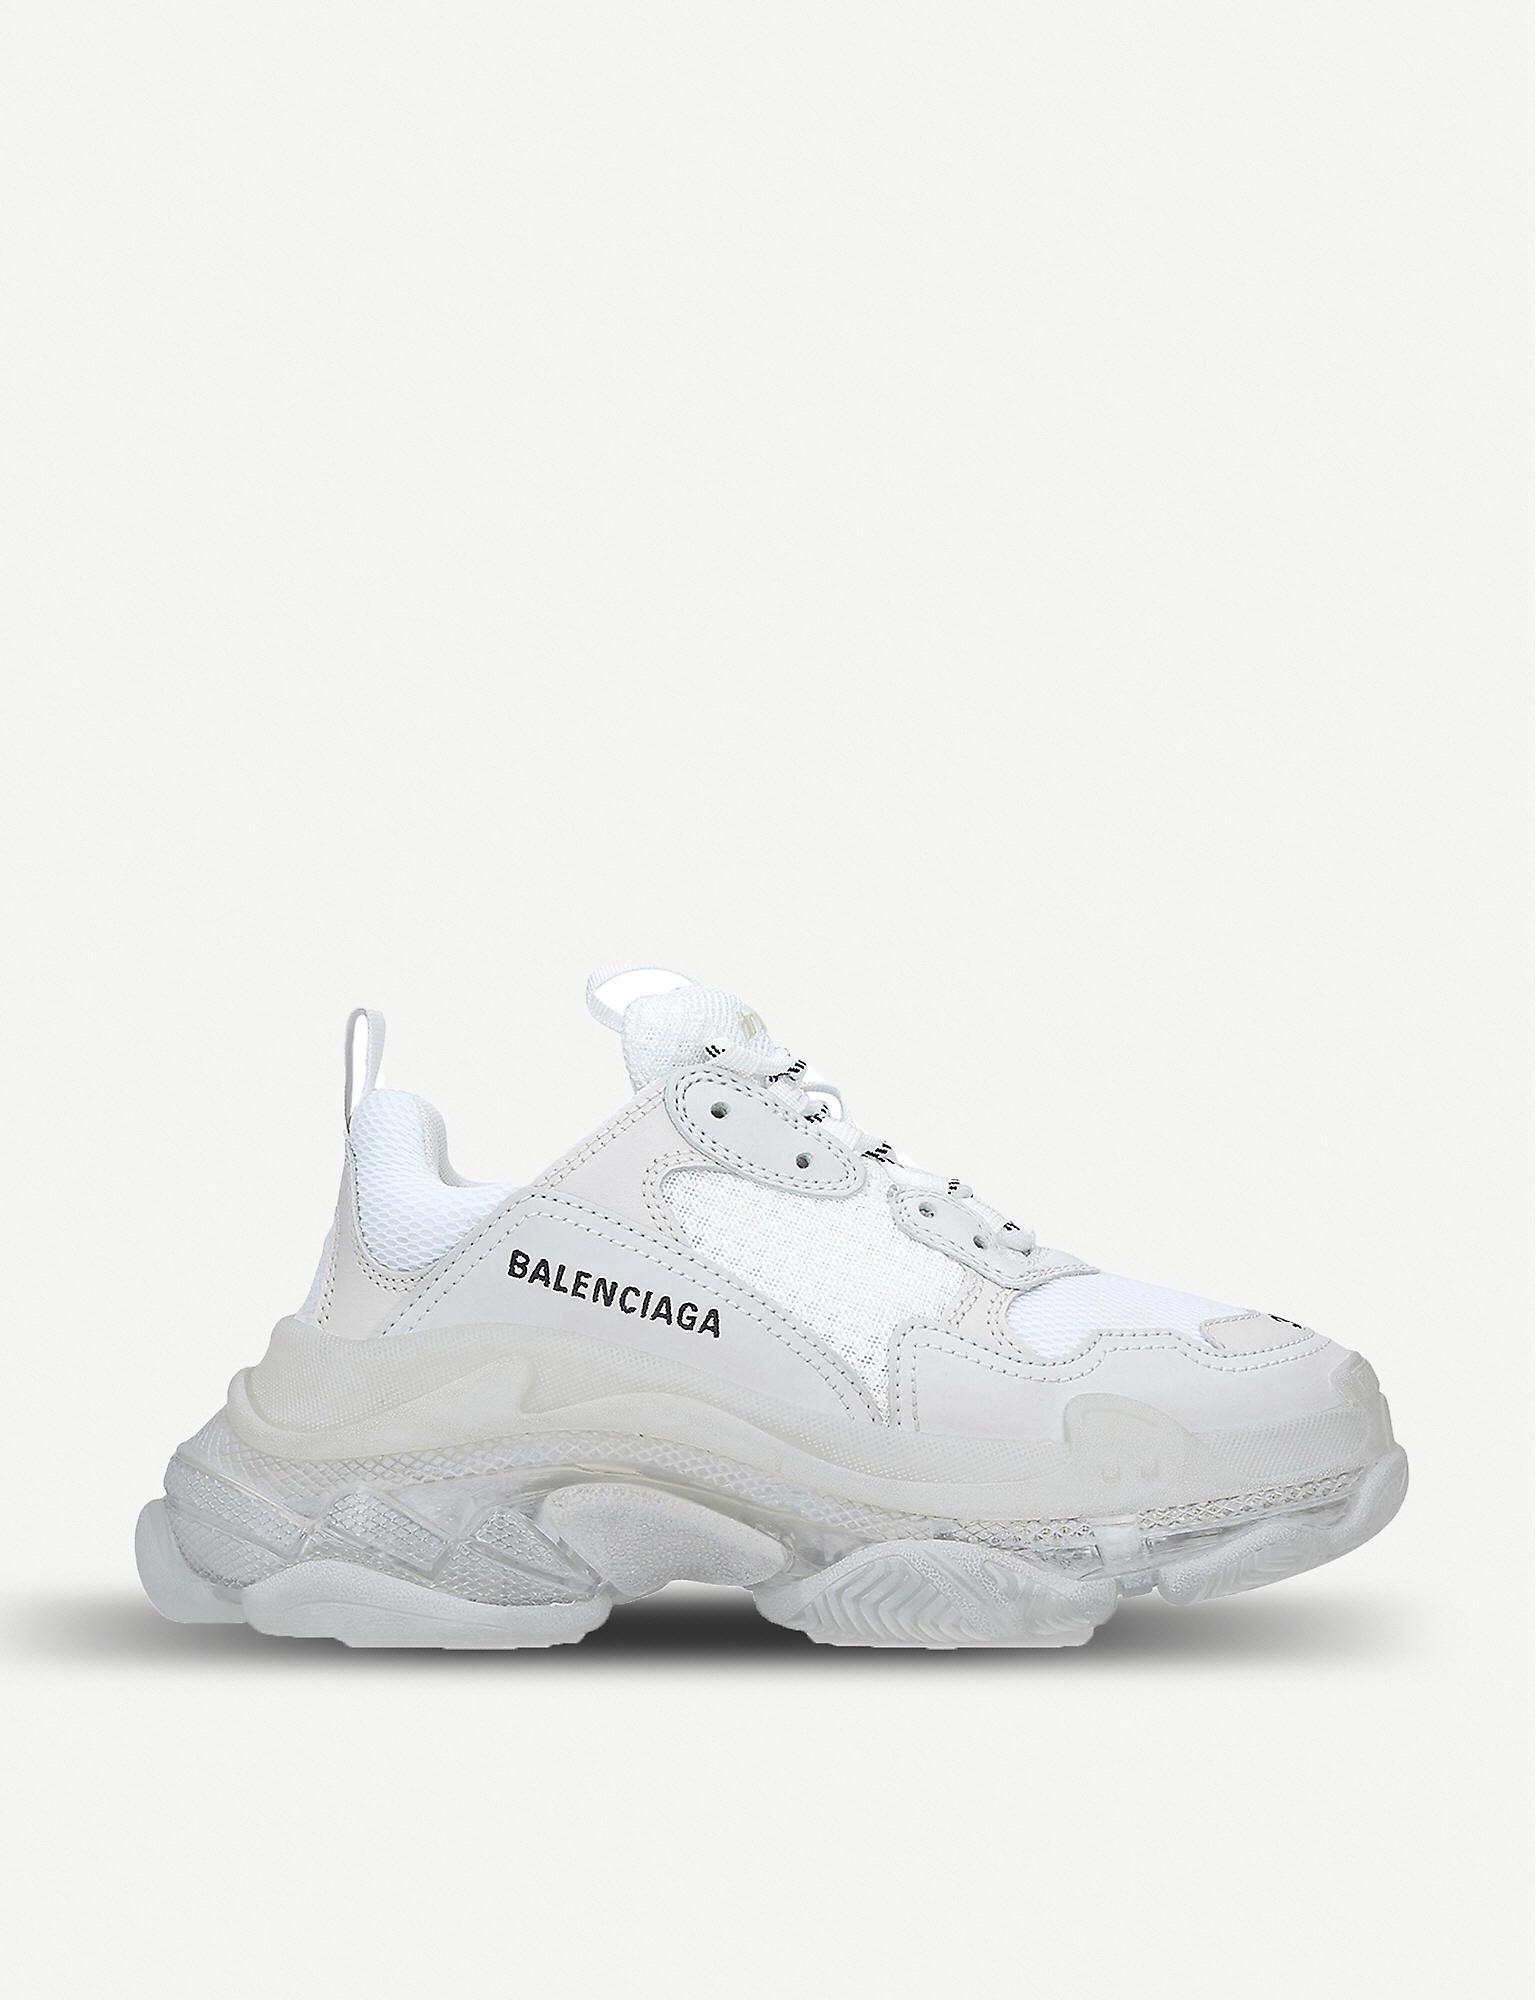 Balenciaga Triple S Clear Sole Leather And Mesh Trainers in White - Lyst